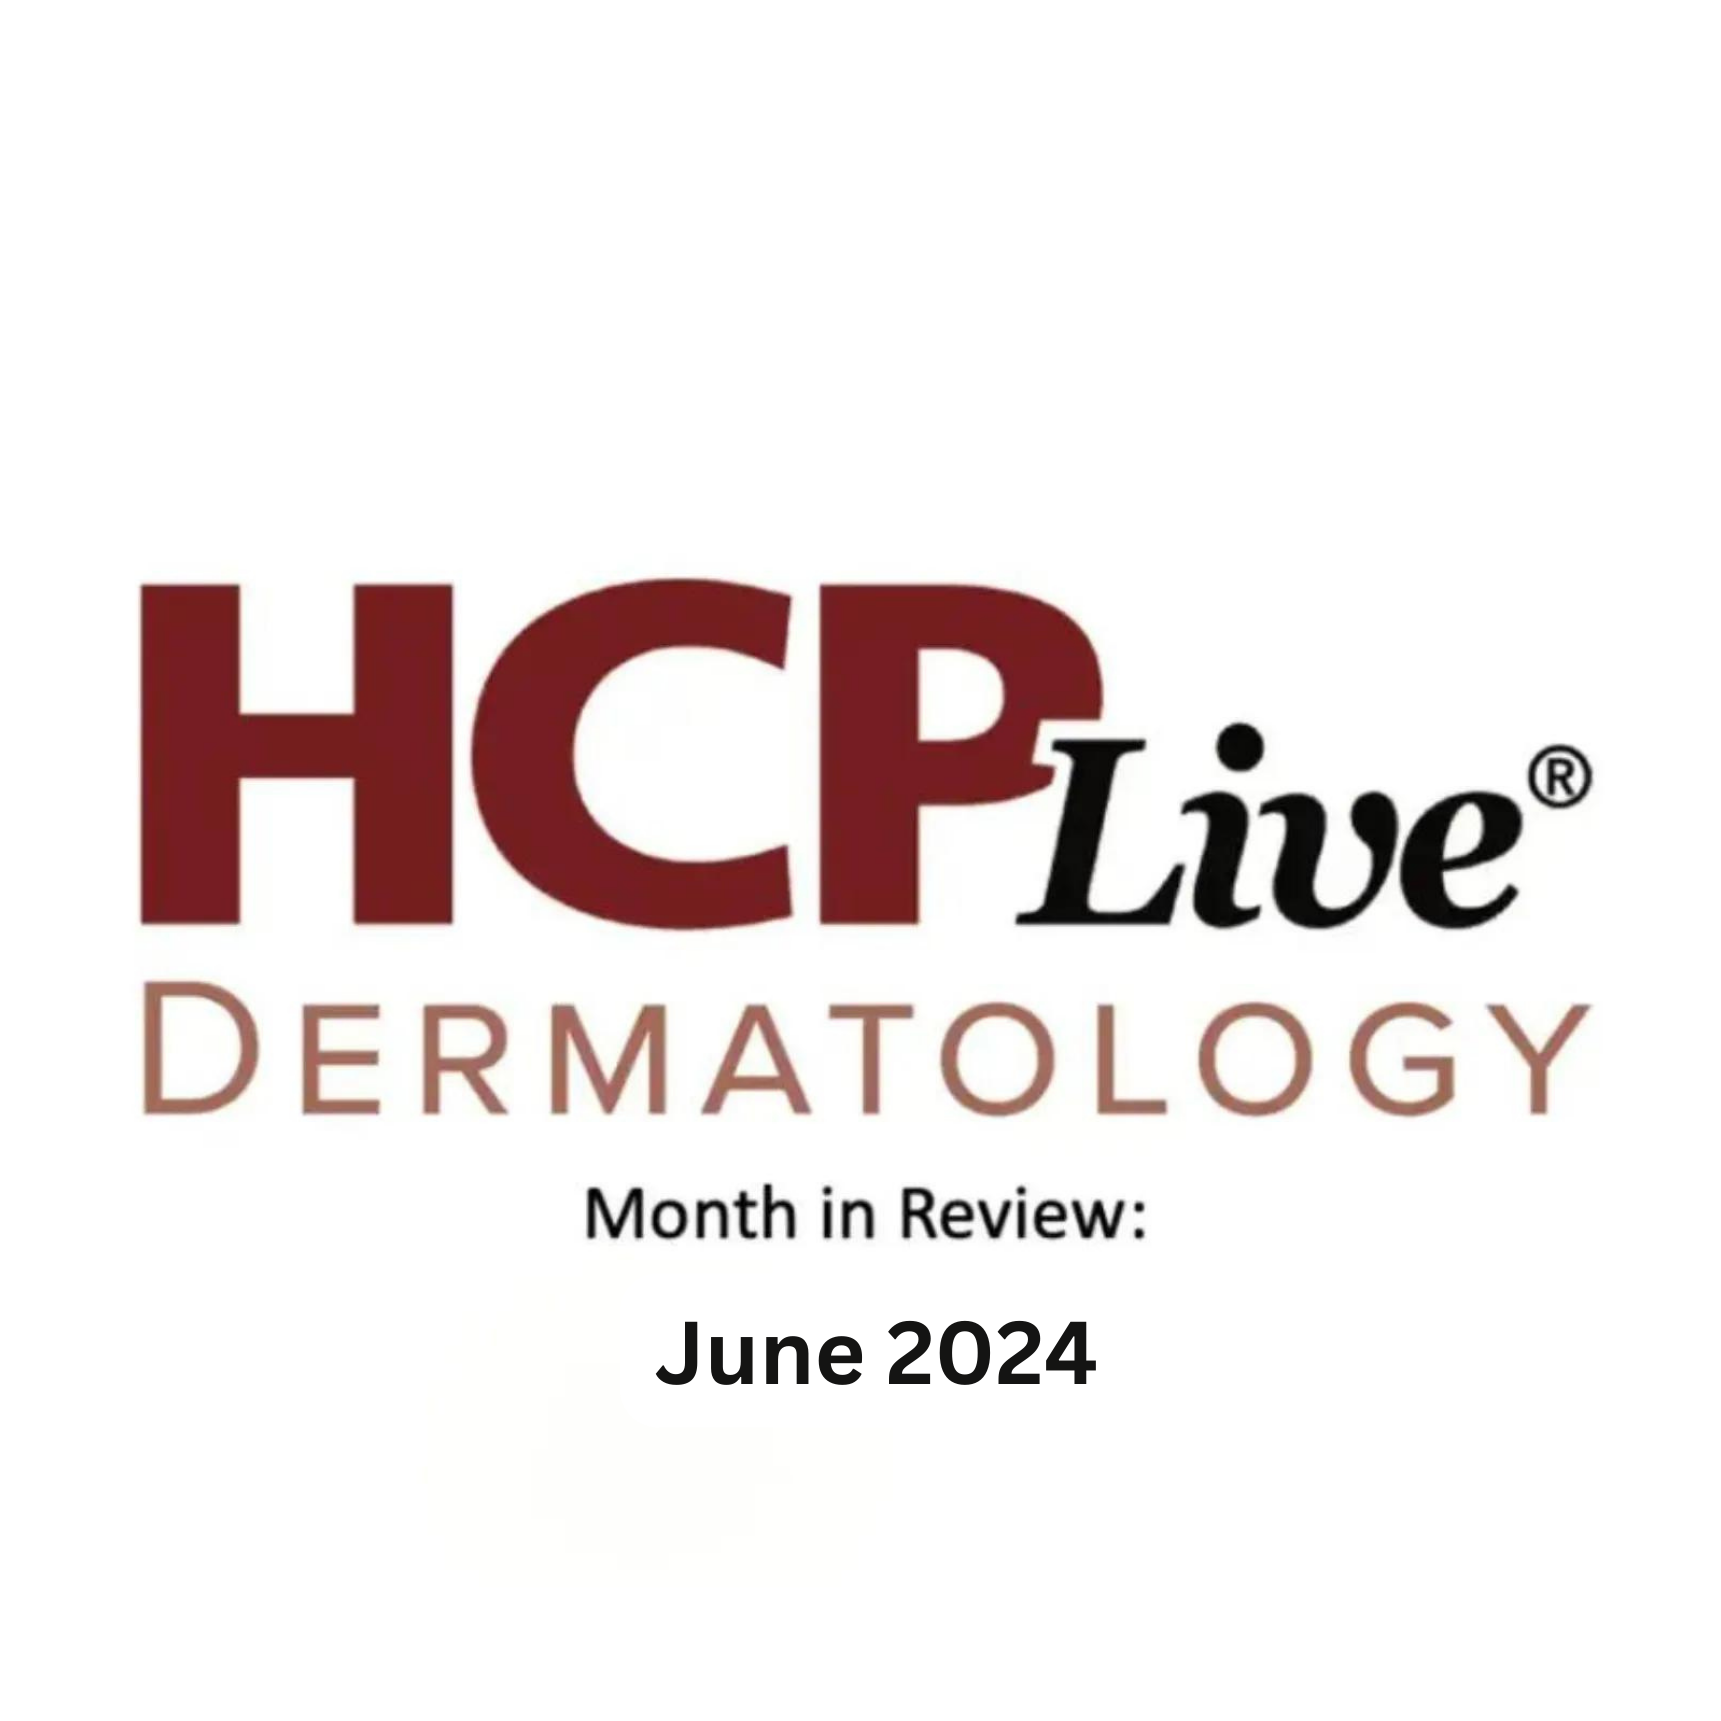 Dermatology Month in Review: June 2024